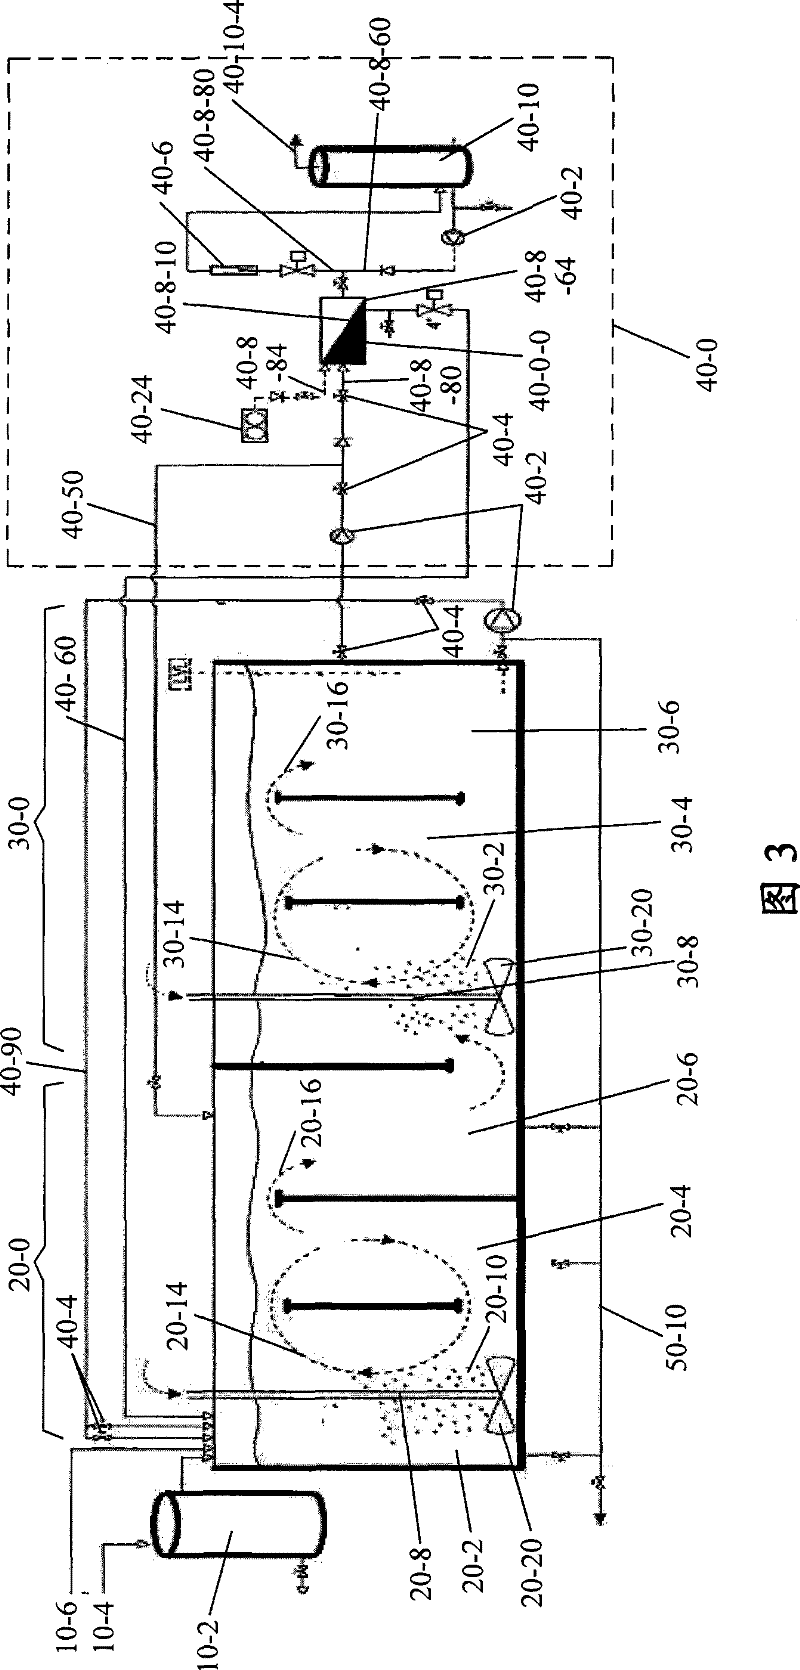 Lateral flow type membrane bioreactor device and sewage treatment method using same